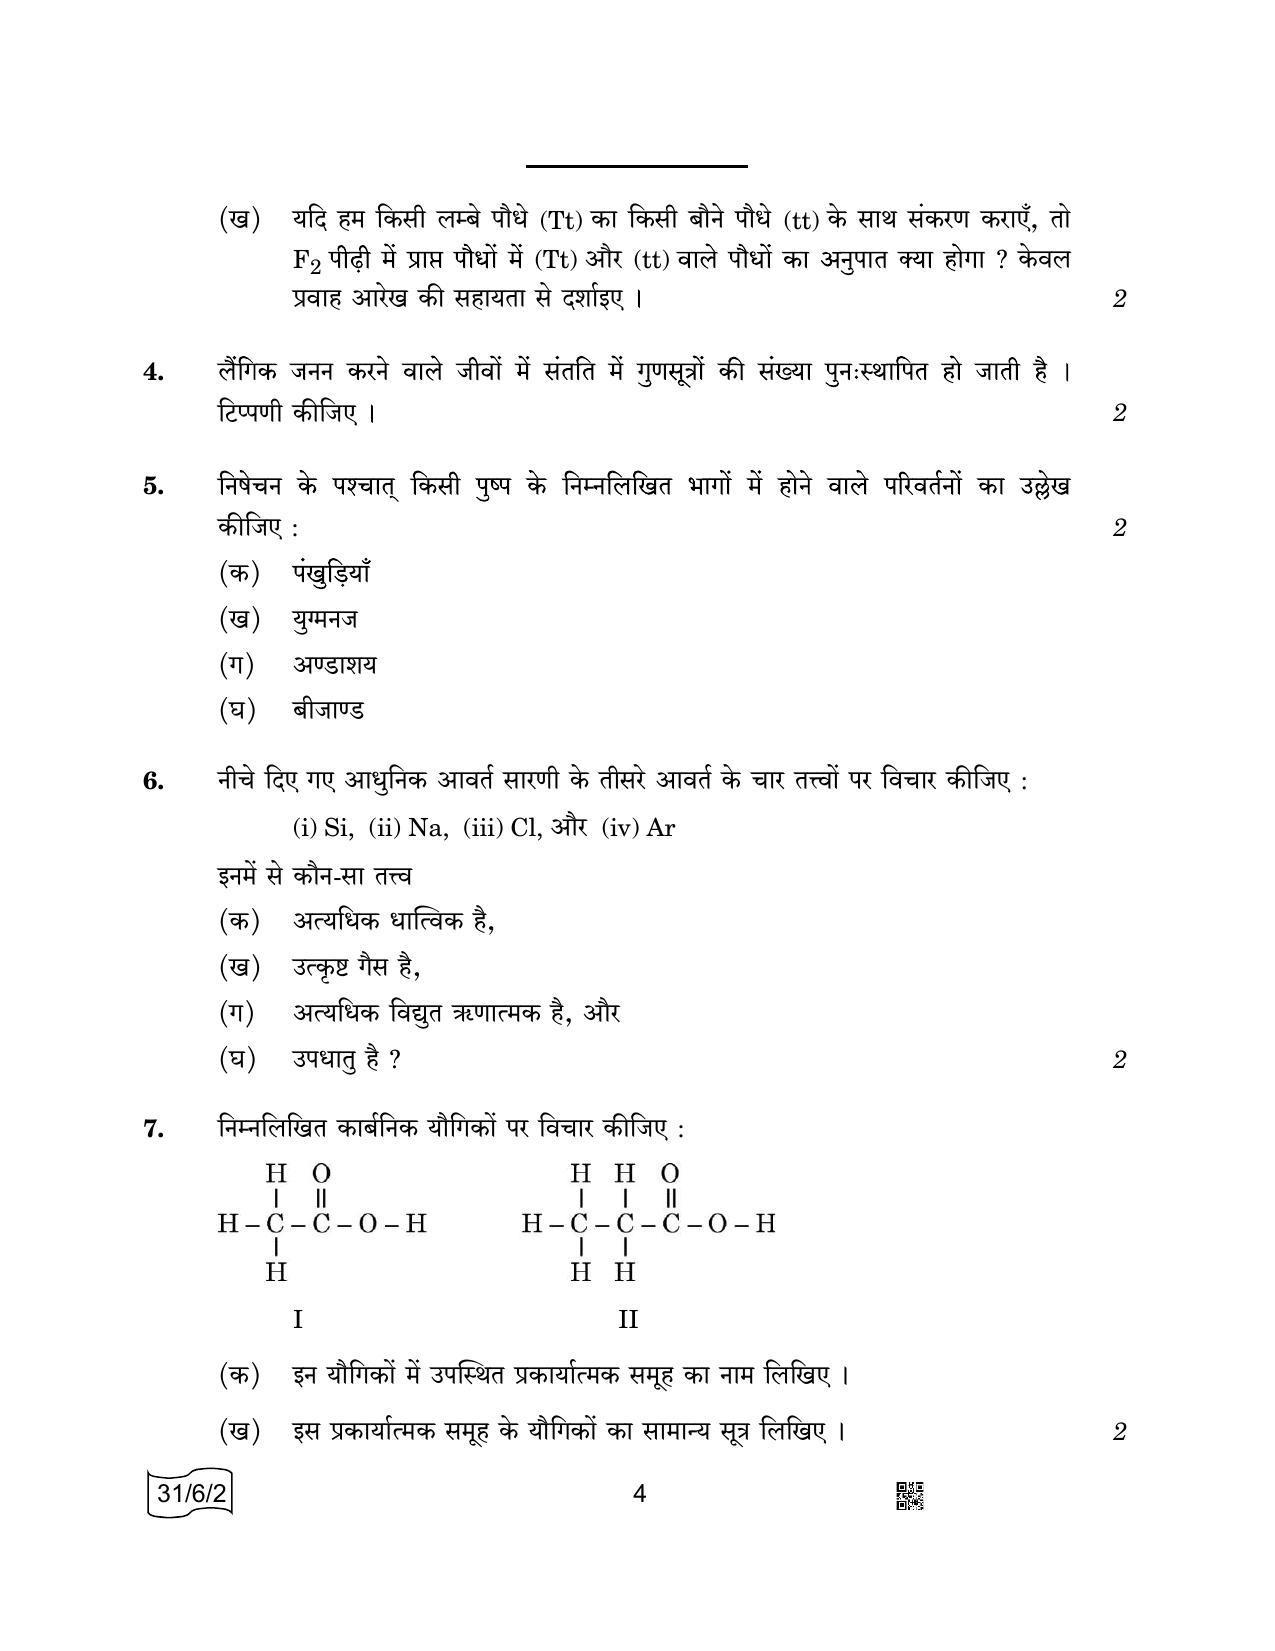 CBSE Class 10 31-6-2 SCIENCE 2022 Compartment Question Paper - Page 4